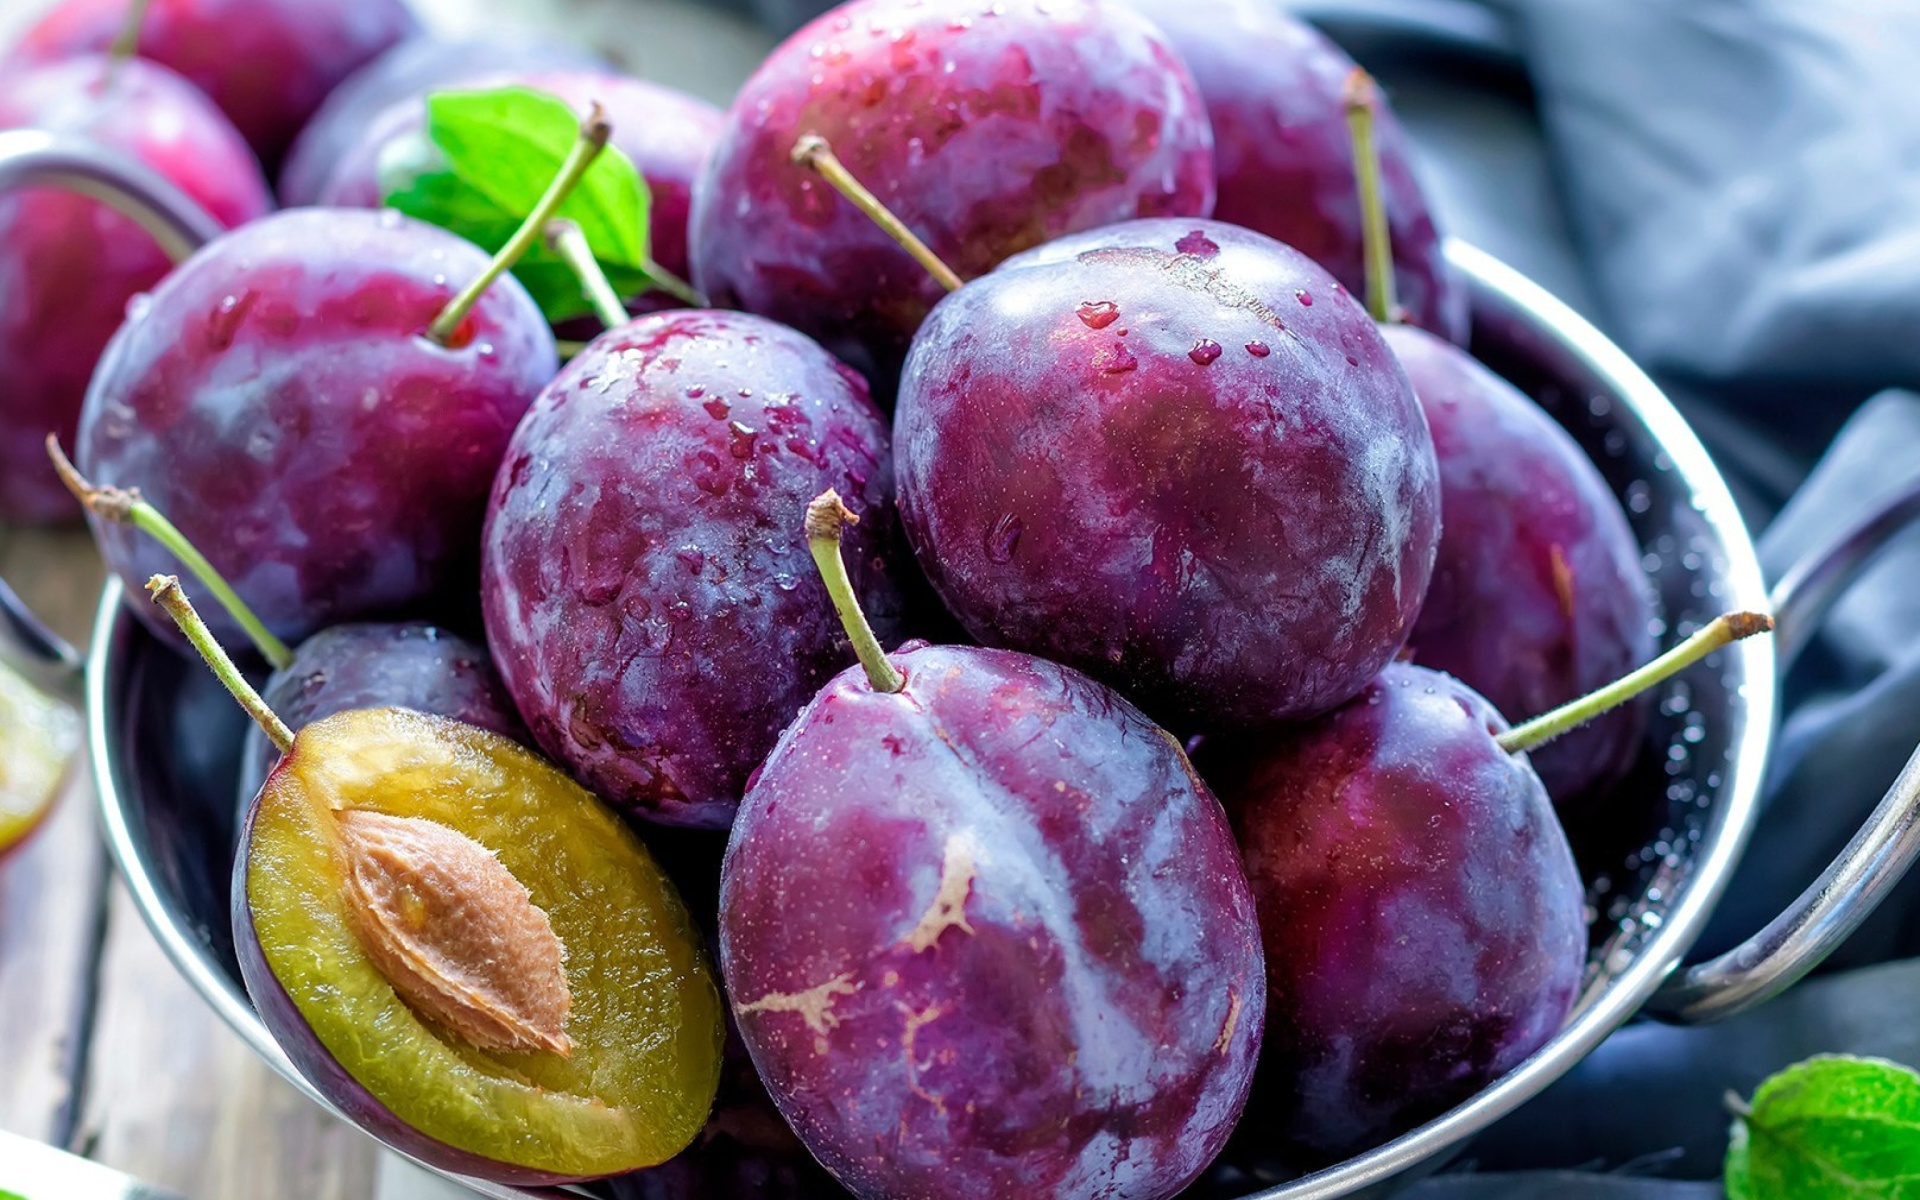 Das Plums with Vitamins Wallpaper 1920x1200